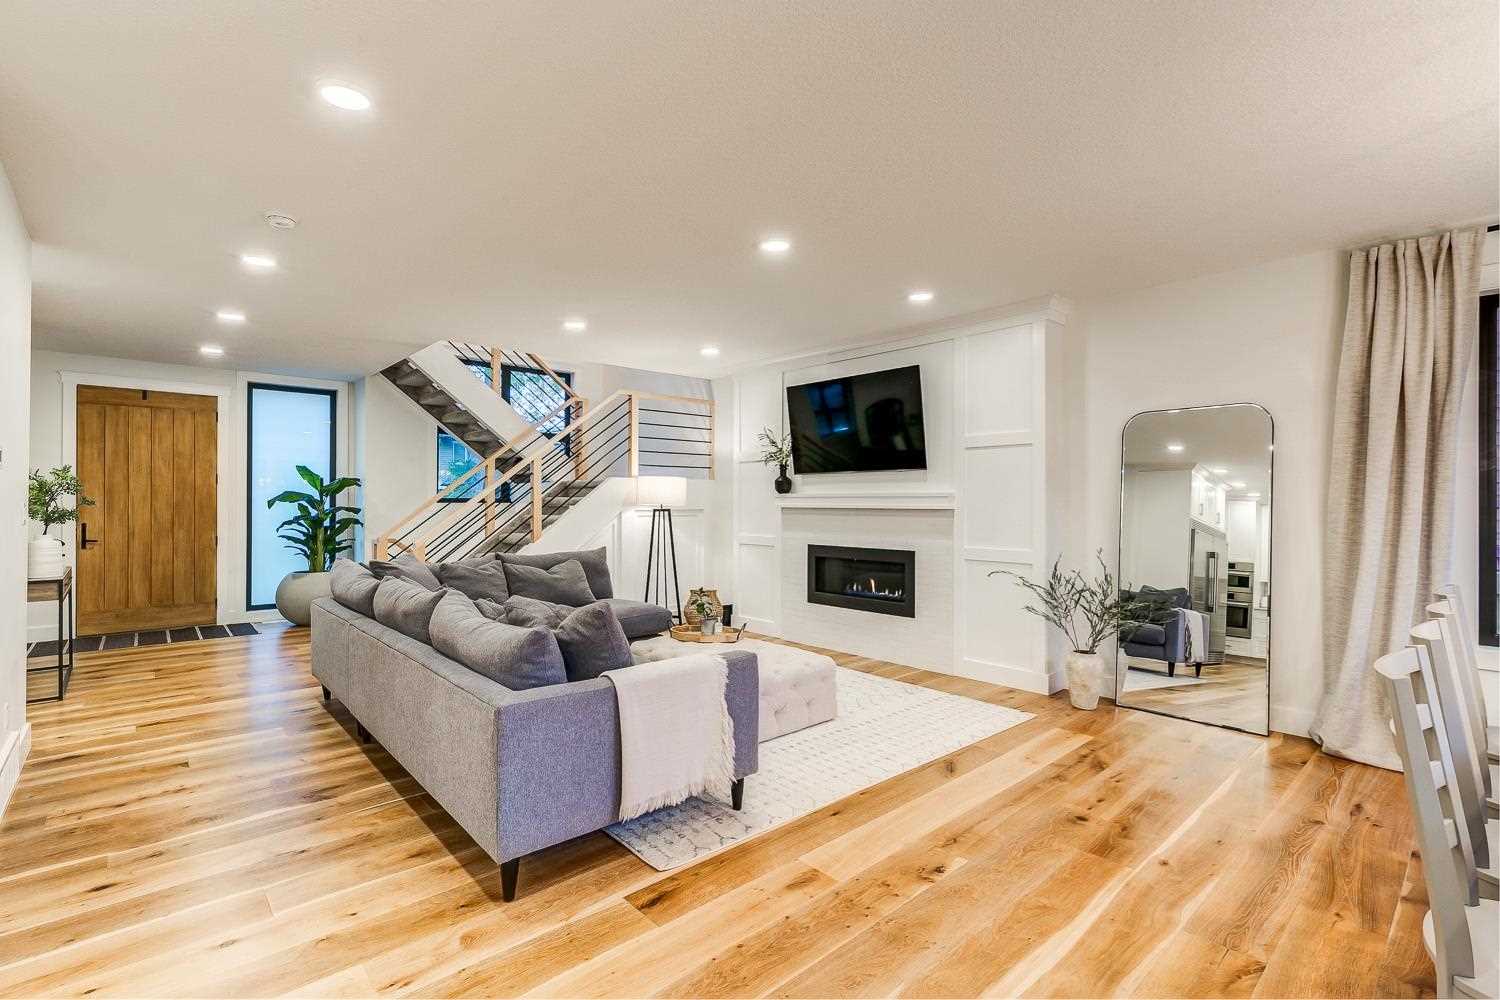 Interior living room, white ceiling and walls, light hardwood floor; grey sectional couch facing right to TV mounted above fireplace; open-air stairs background to the left; large mirror against the wall to the right